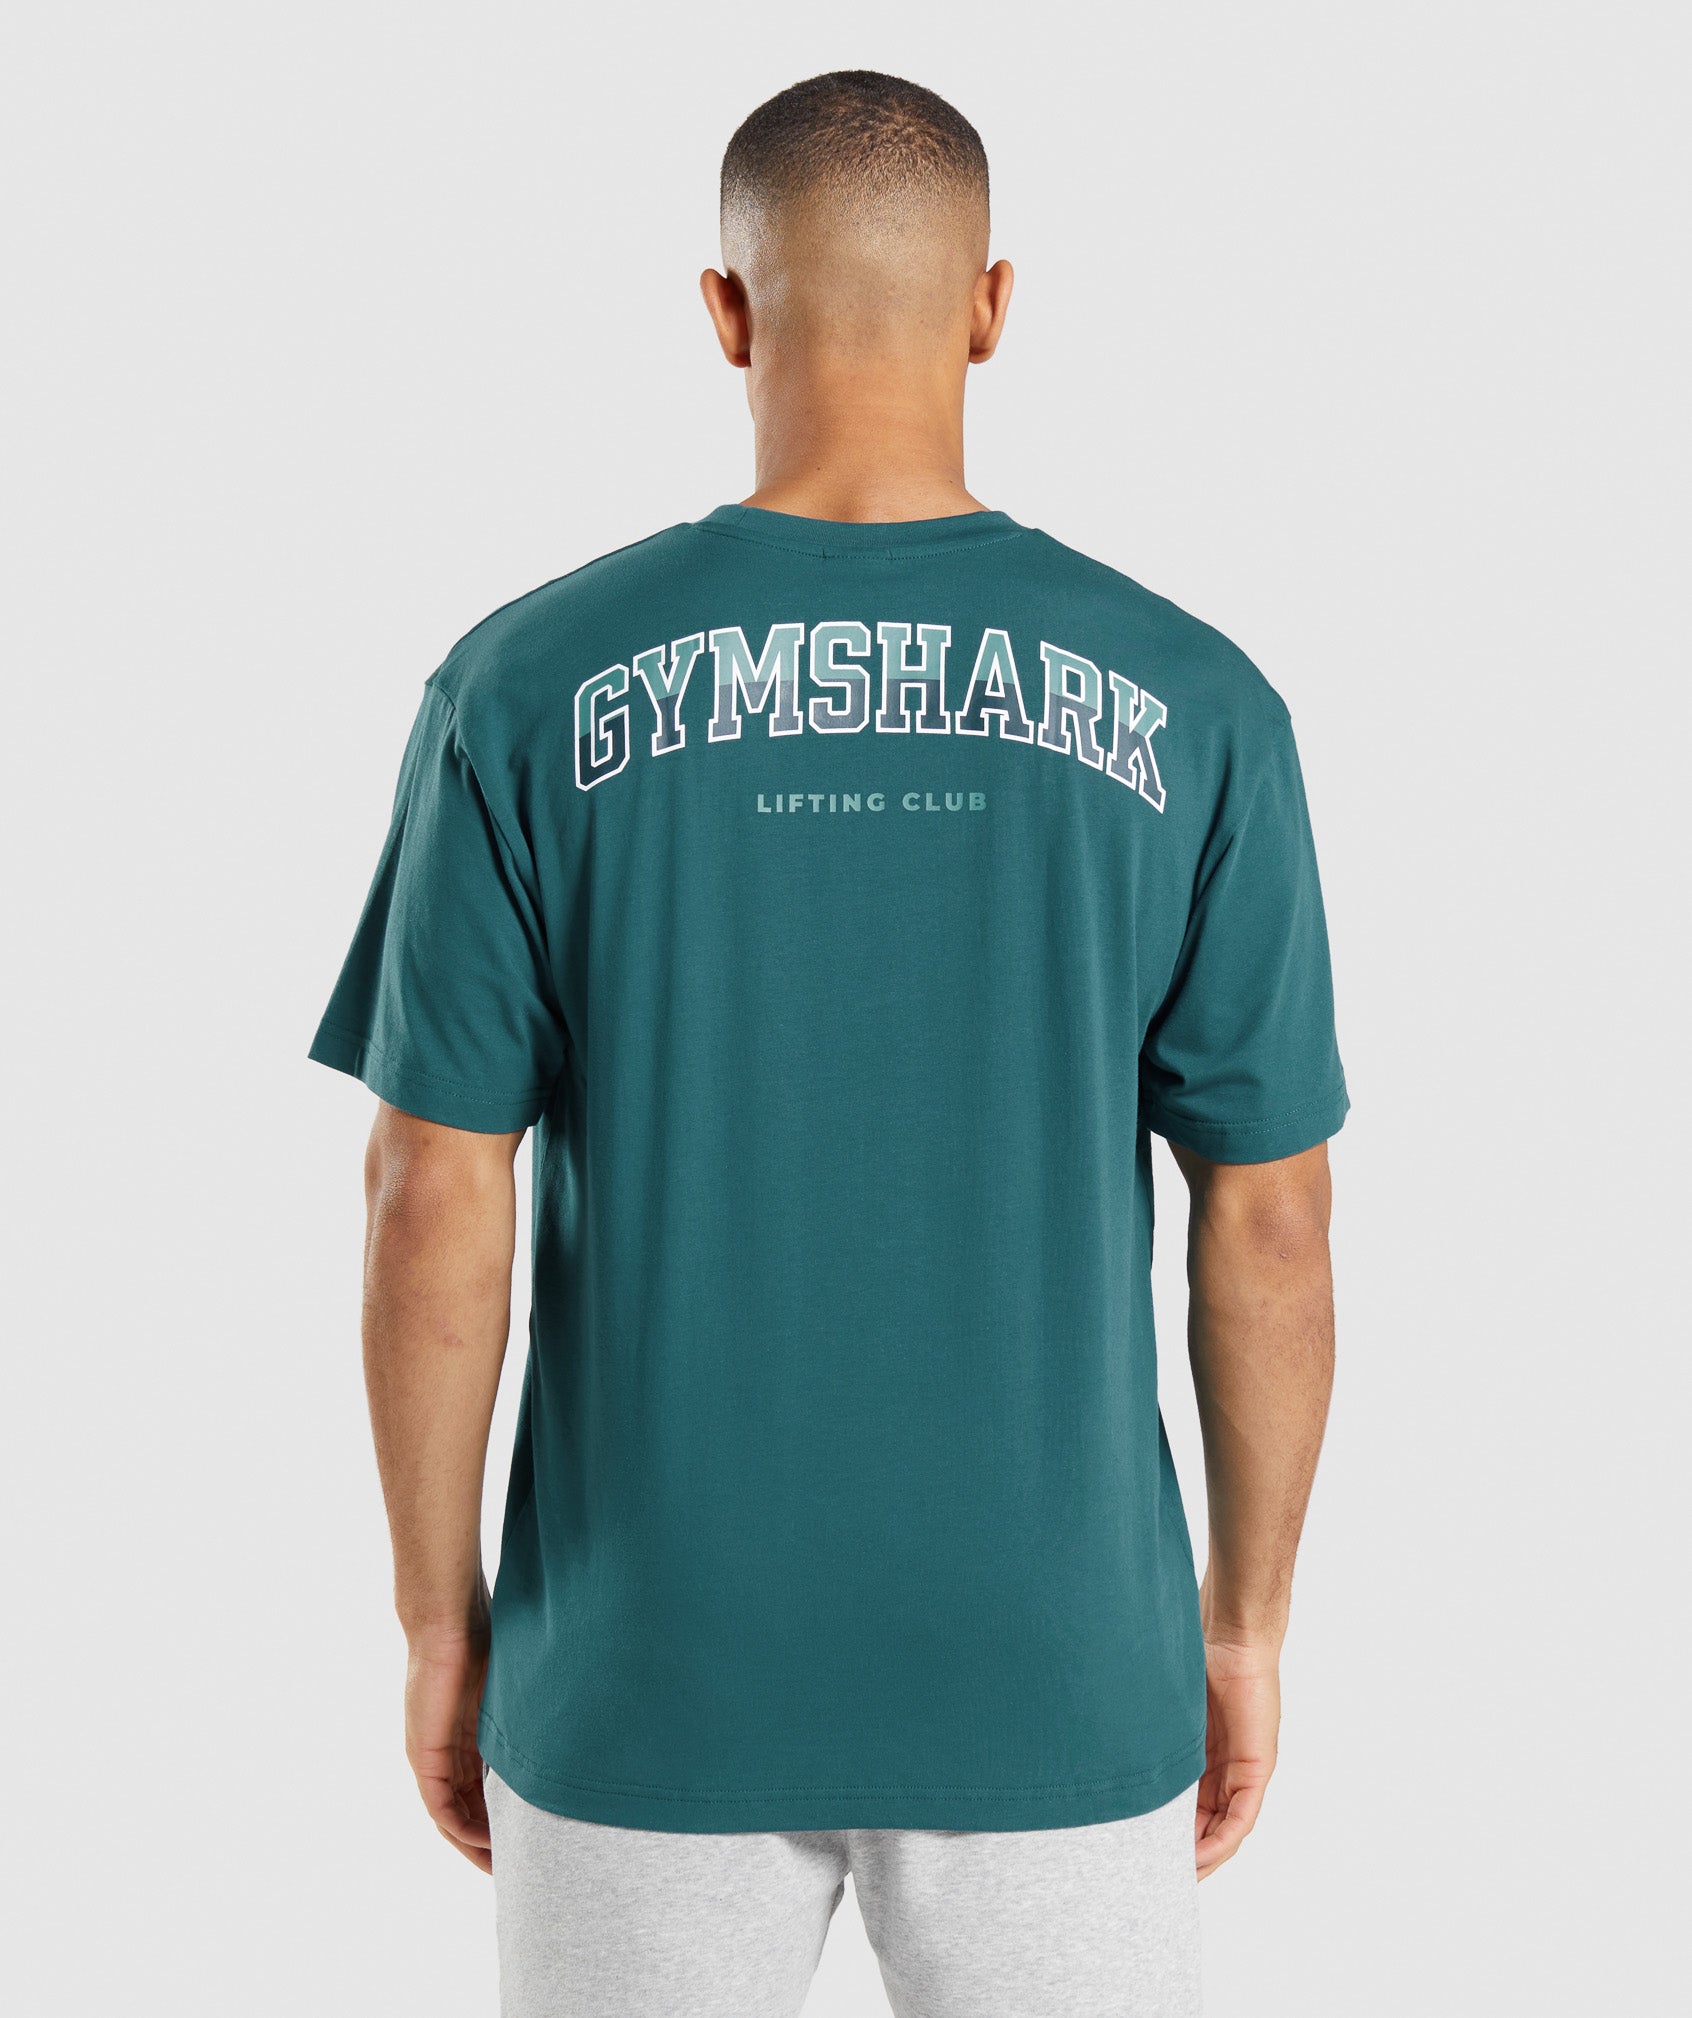 GSLC Oversized T-Shirt in Teal - view 2